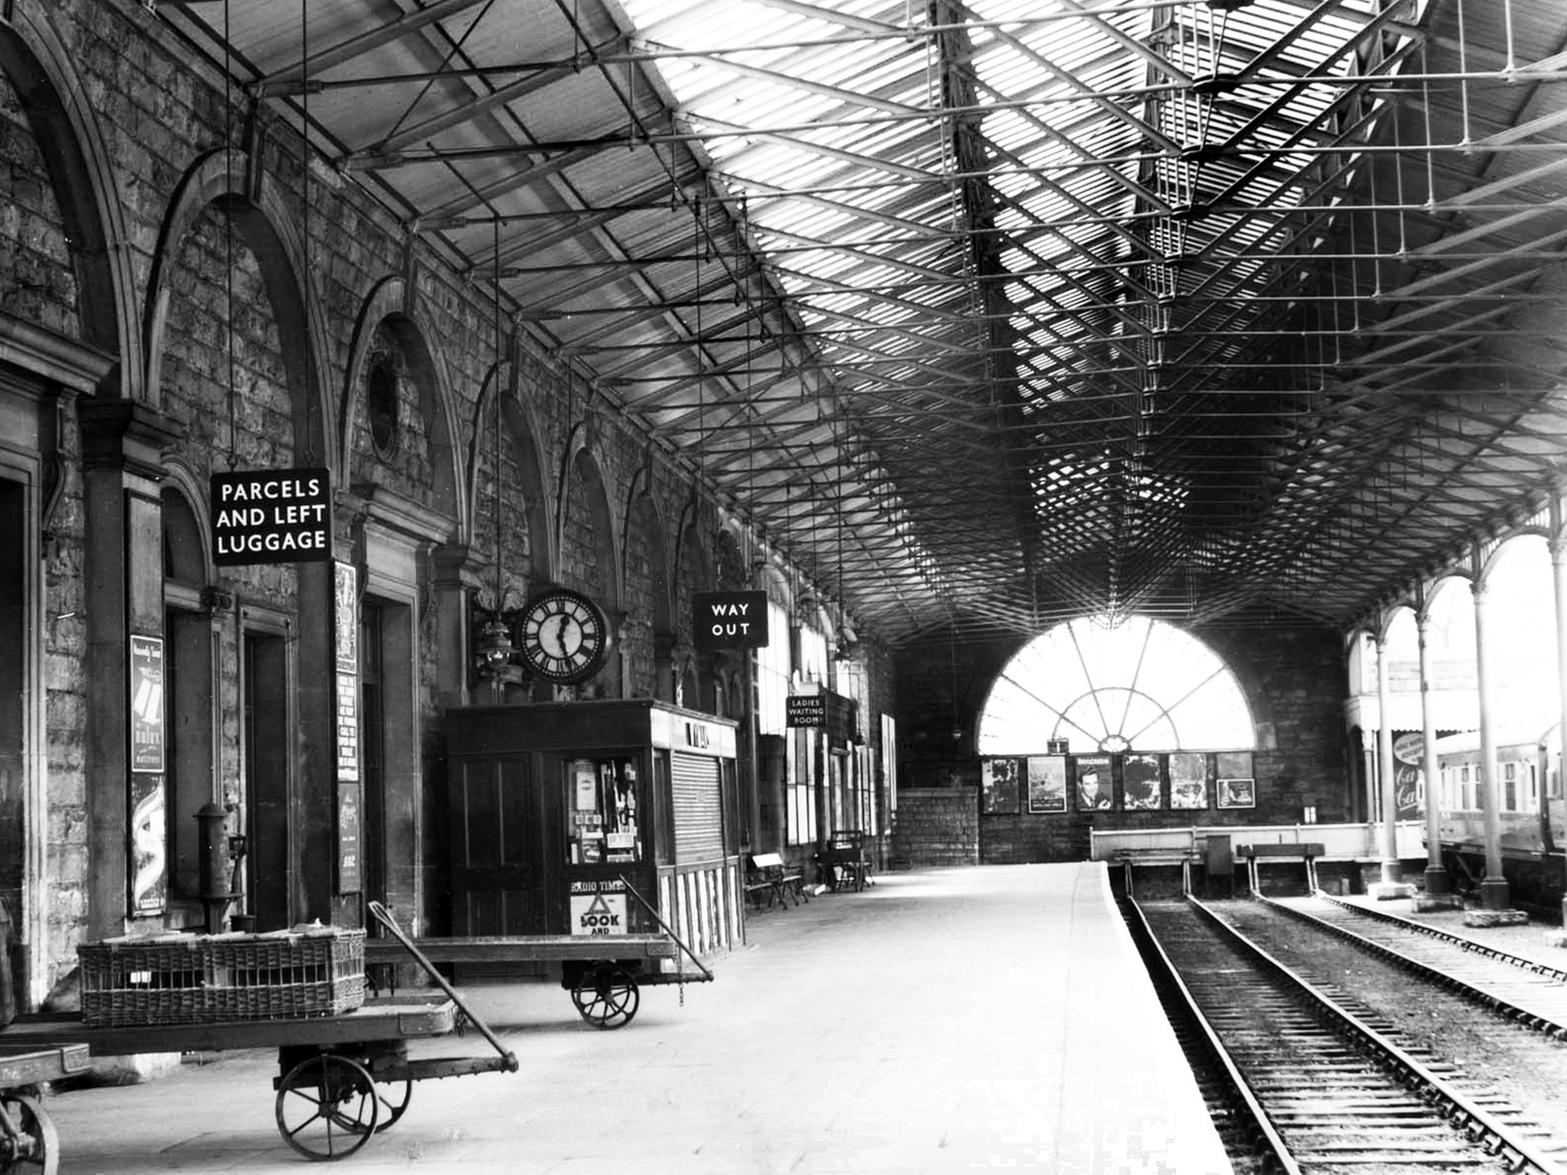 As an added bonus, here's a photo of how Buxton Station used to look, dated May 1953. This side of the station remains in use, today handling passenger services to Manchester.